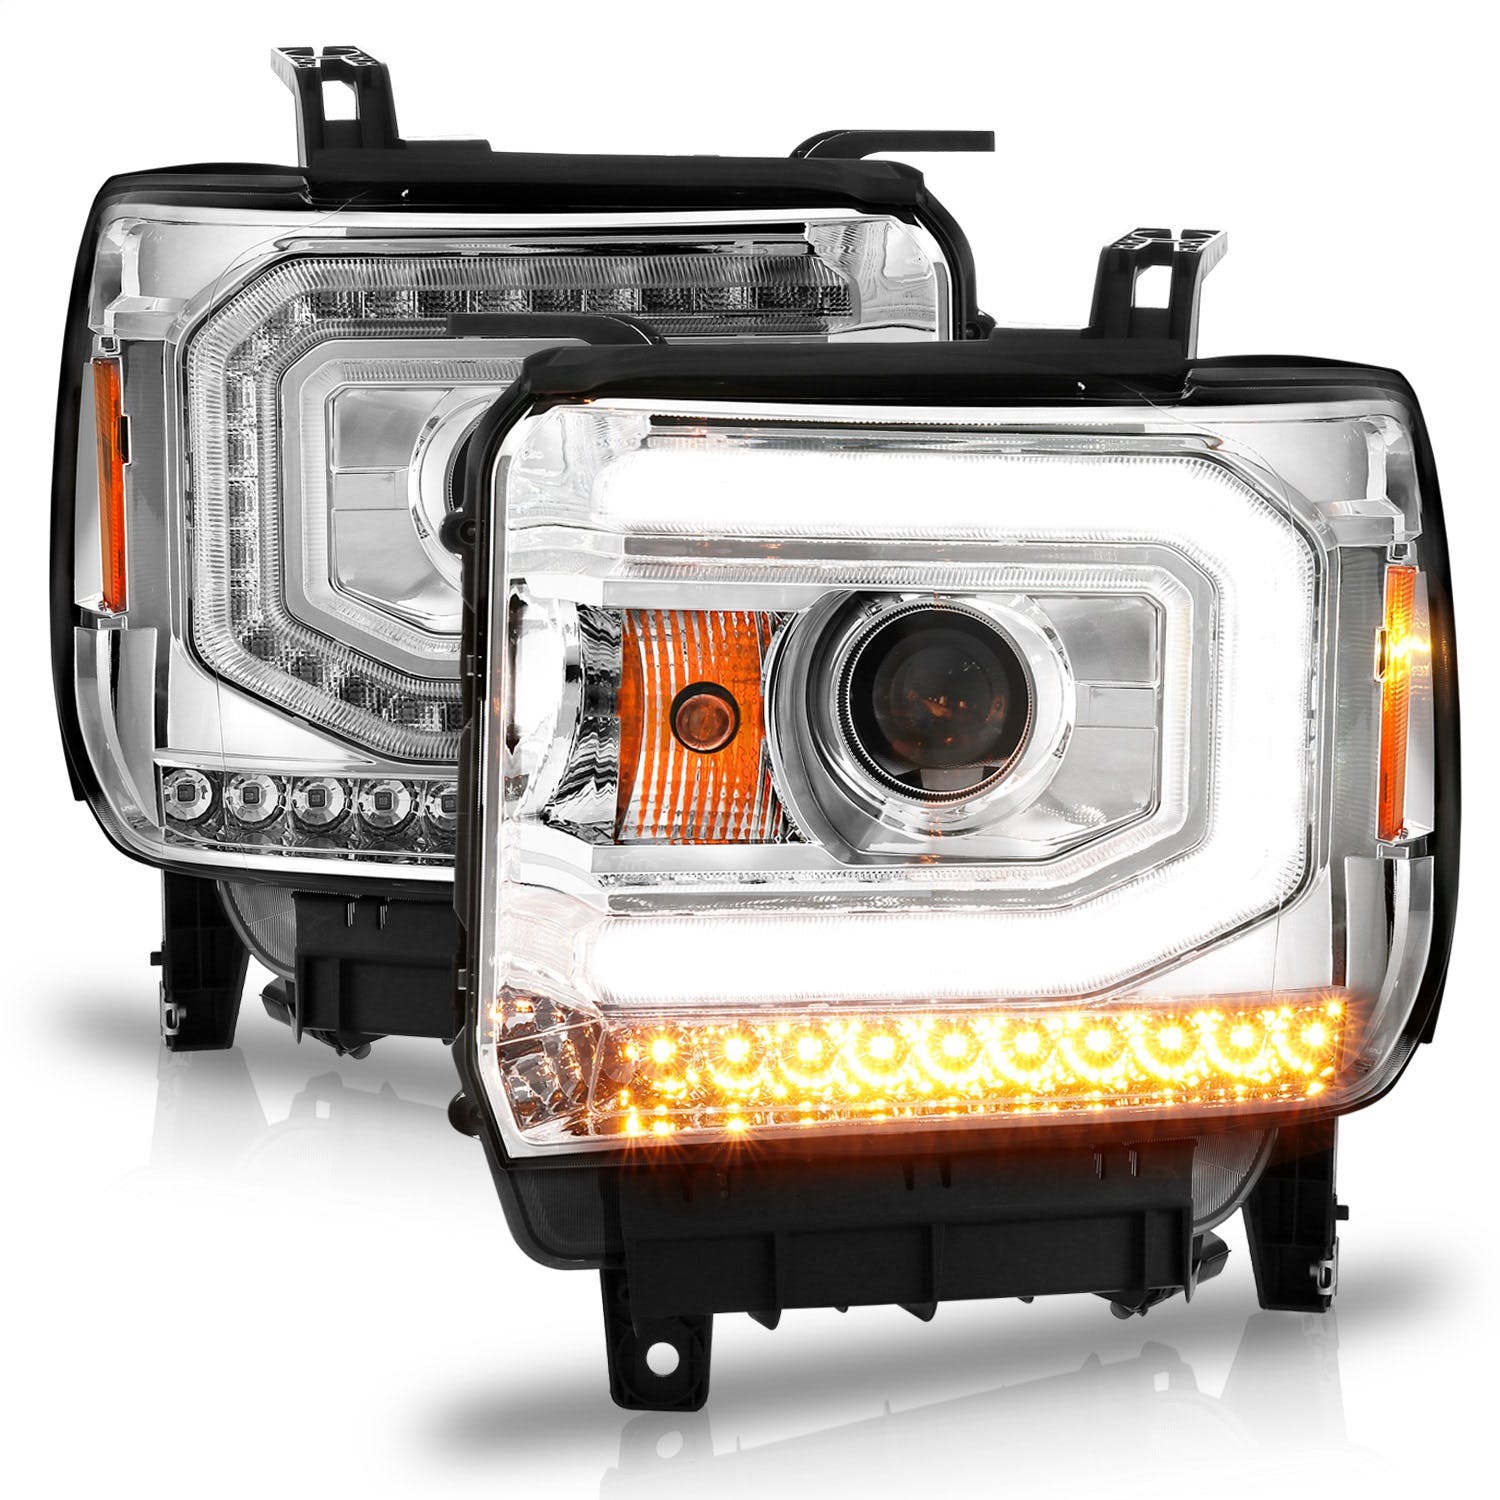 AnzoUSA 111514 Projector Headlights with Light Bar Chrome Housing (Halogen Type)